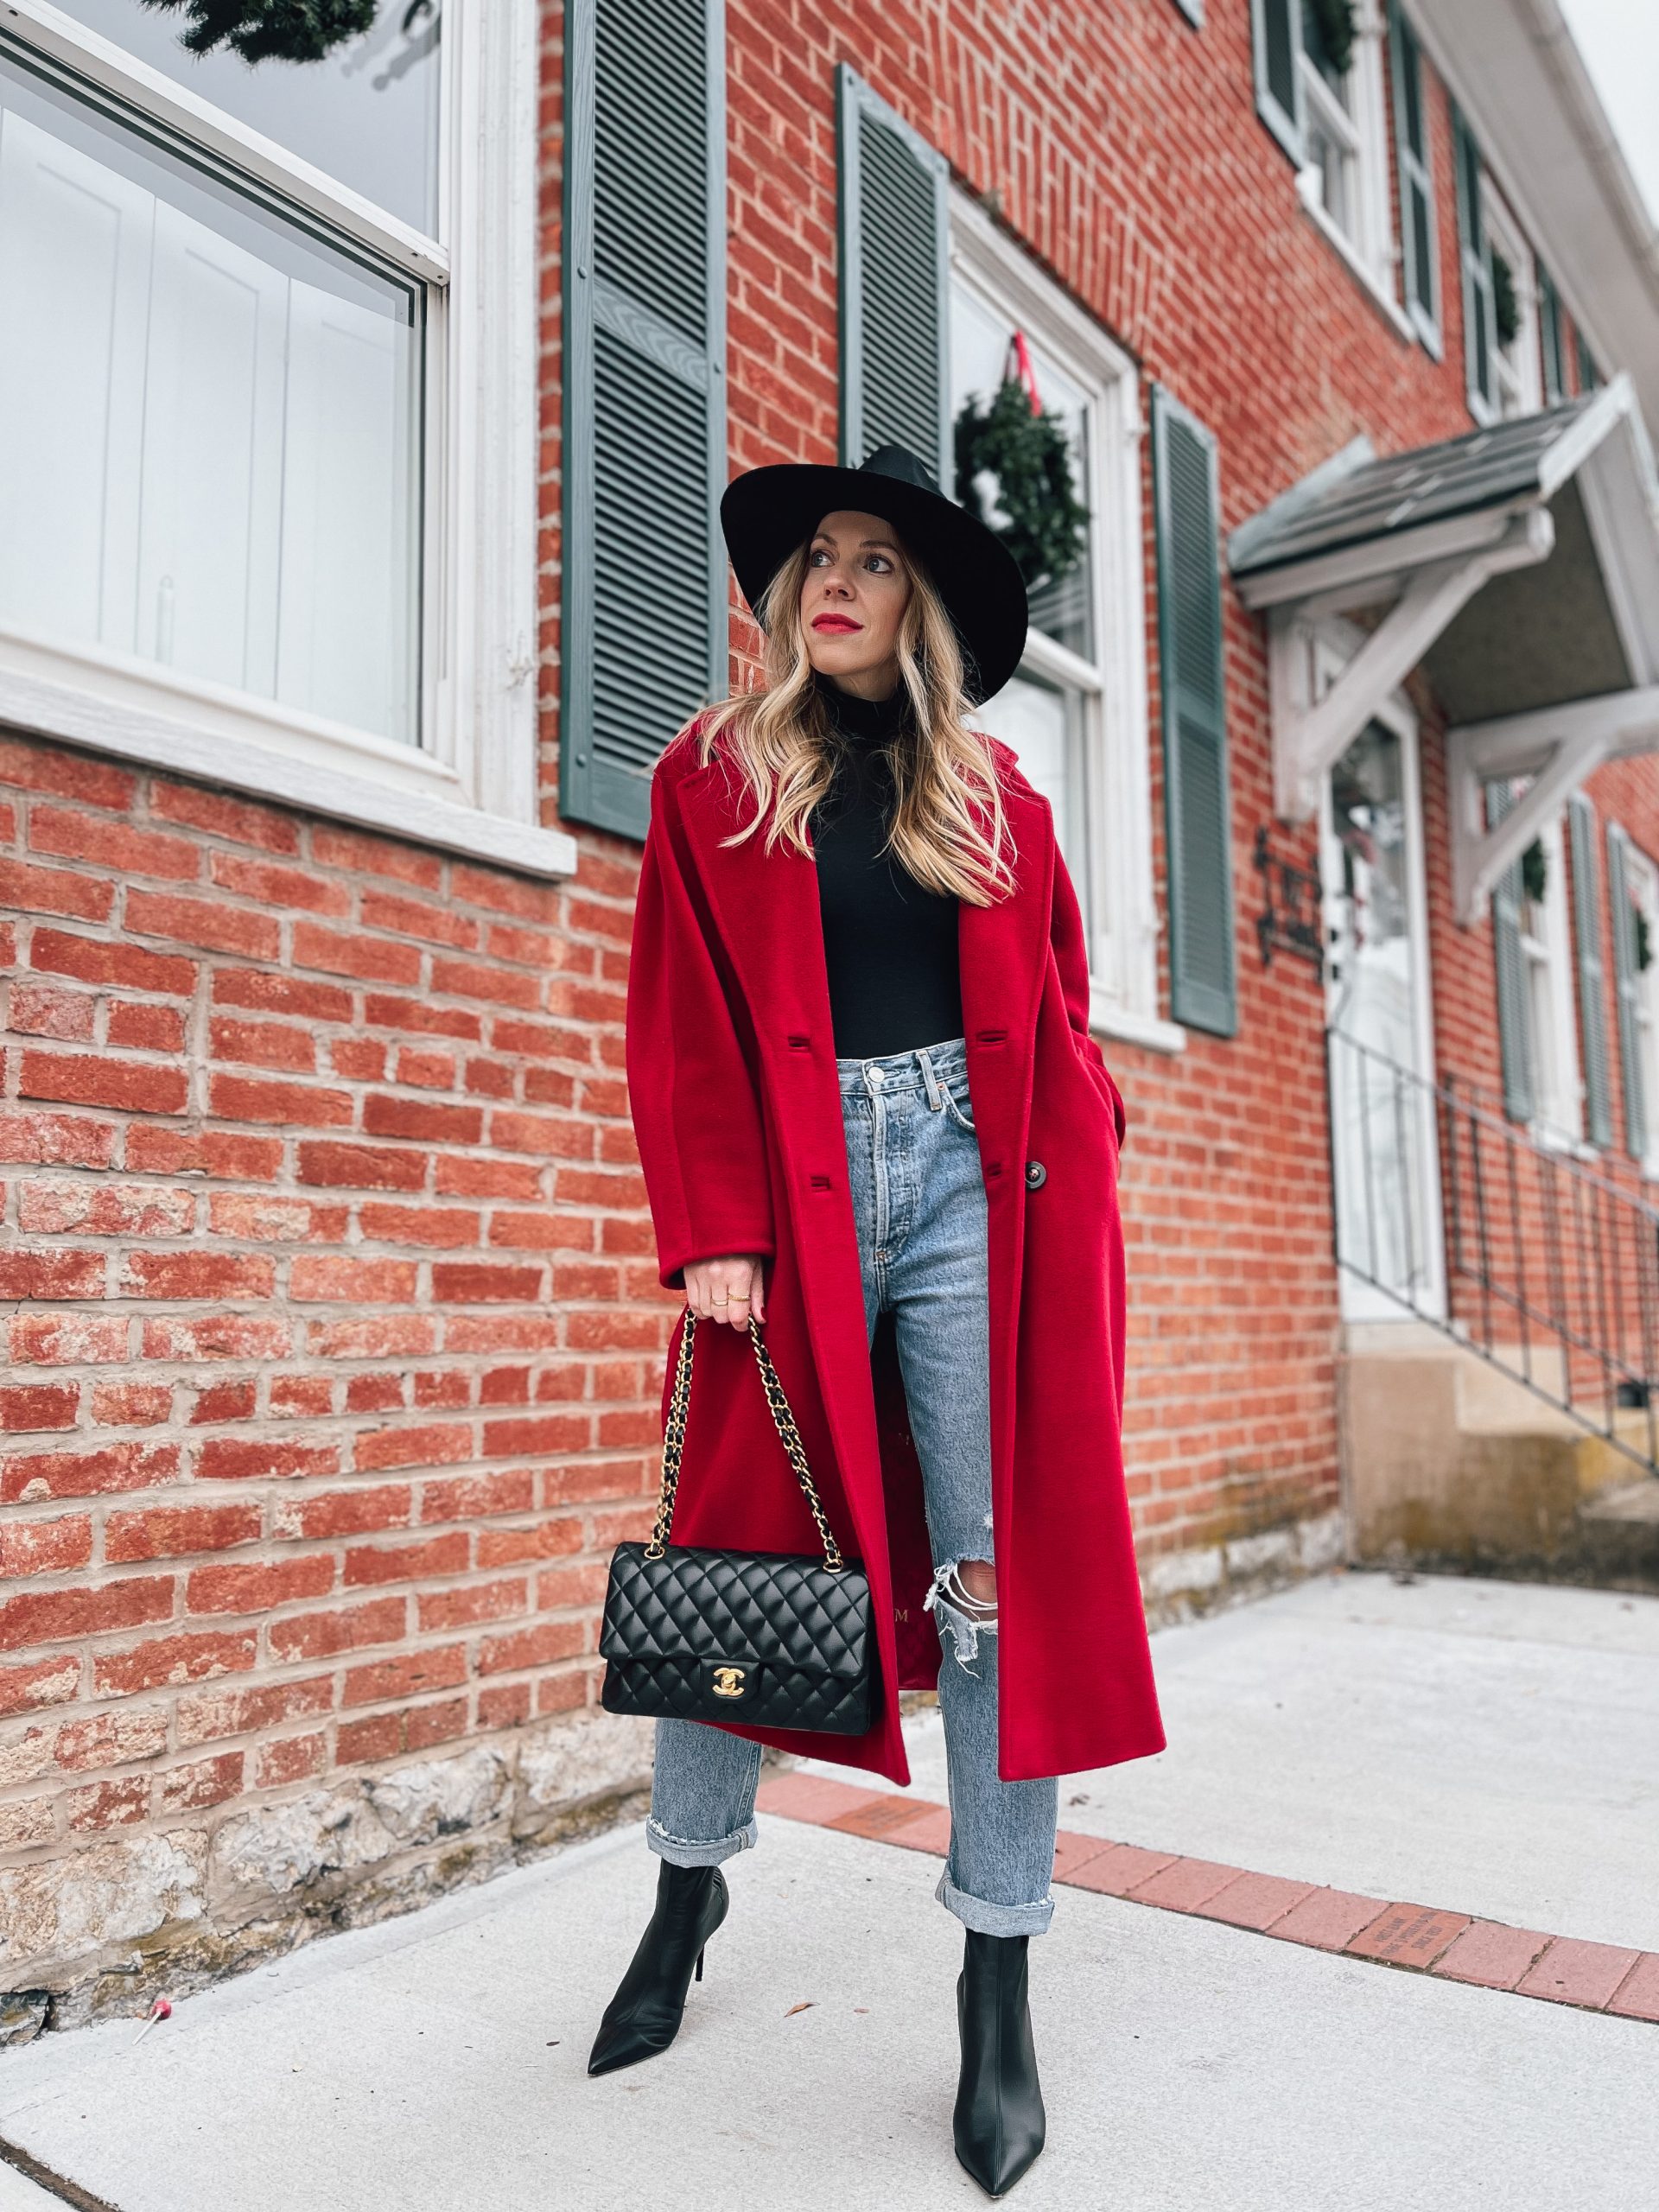 5 Ways to Wear a Red Coat for the Holidays - Meagan's Moda